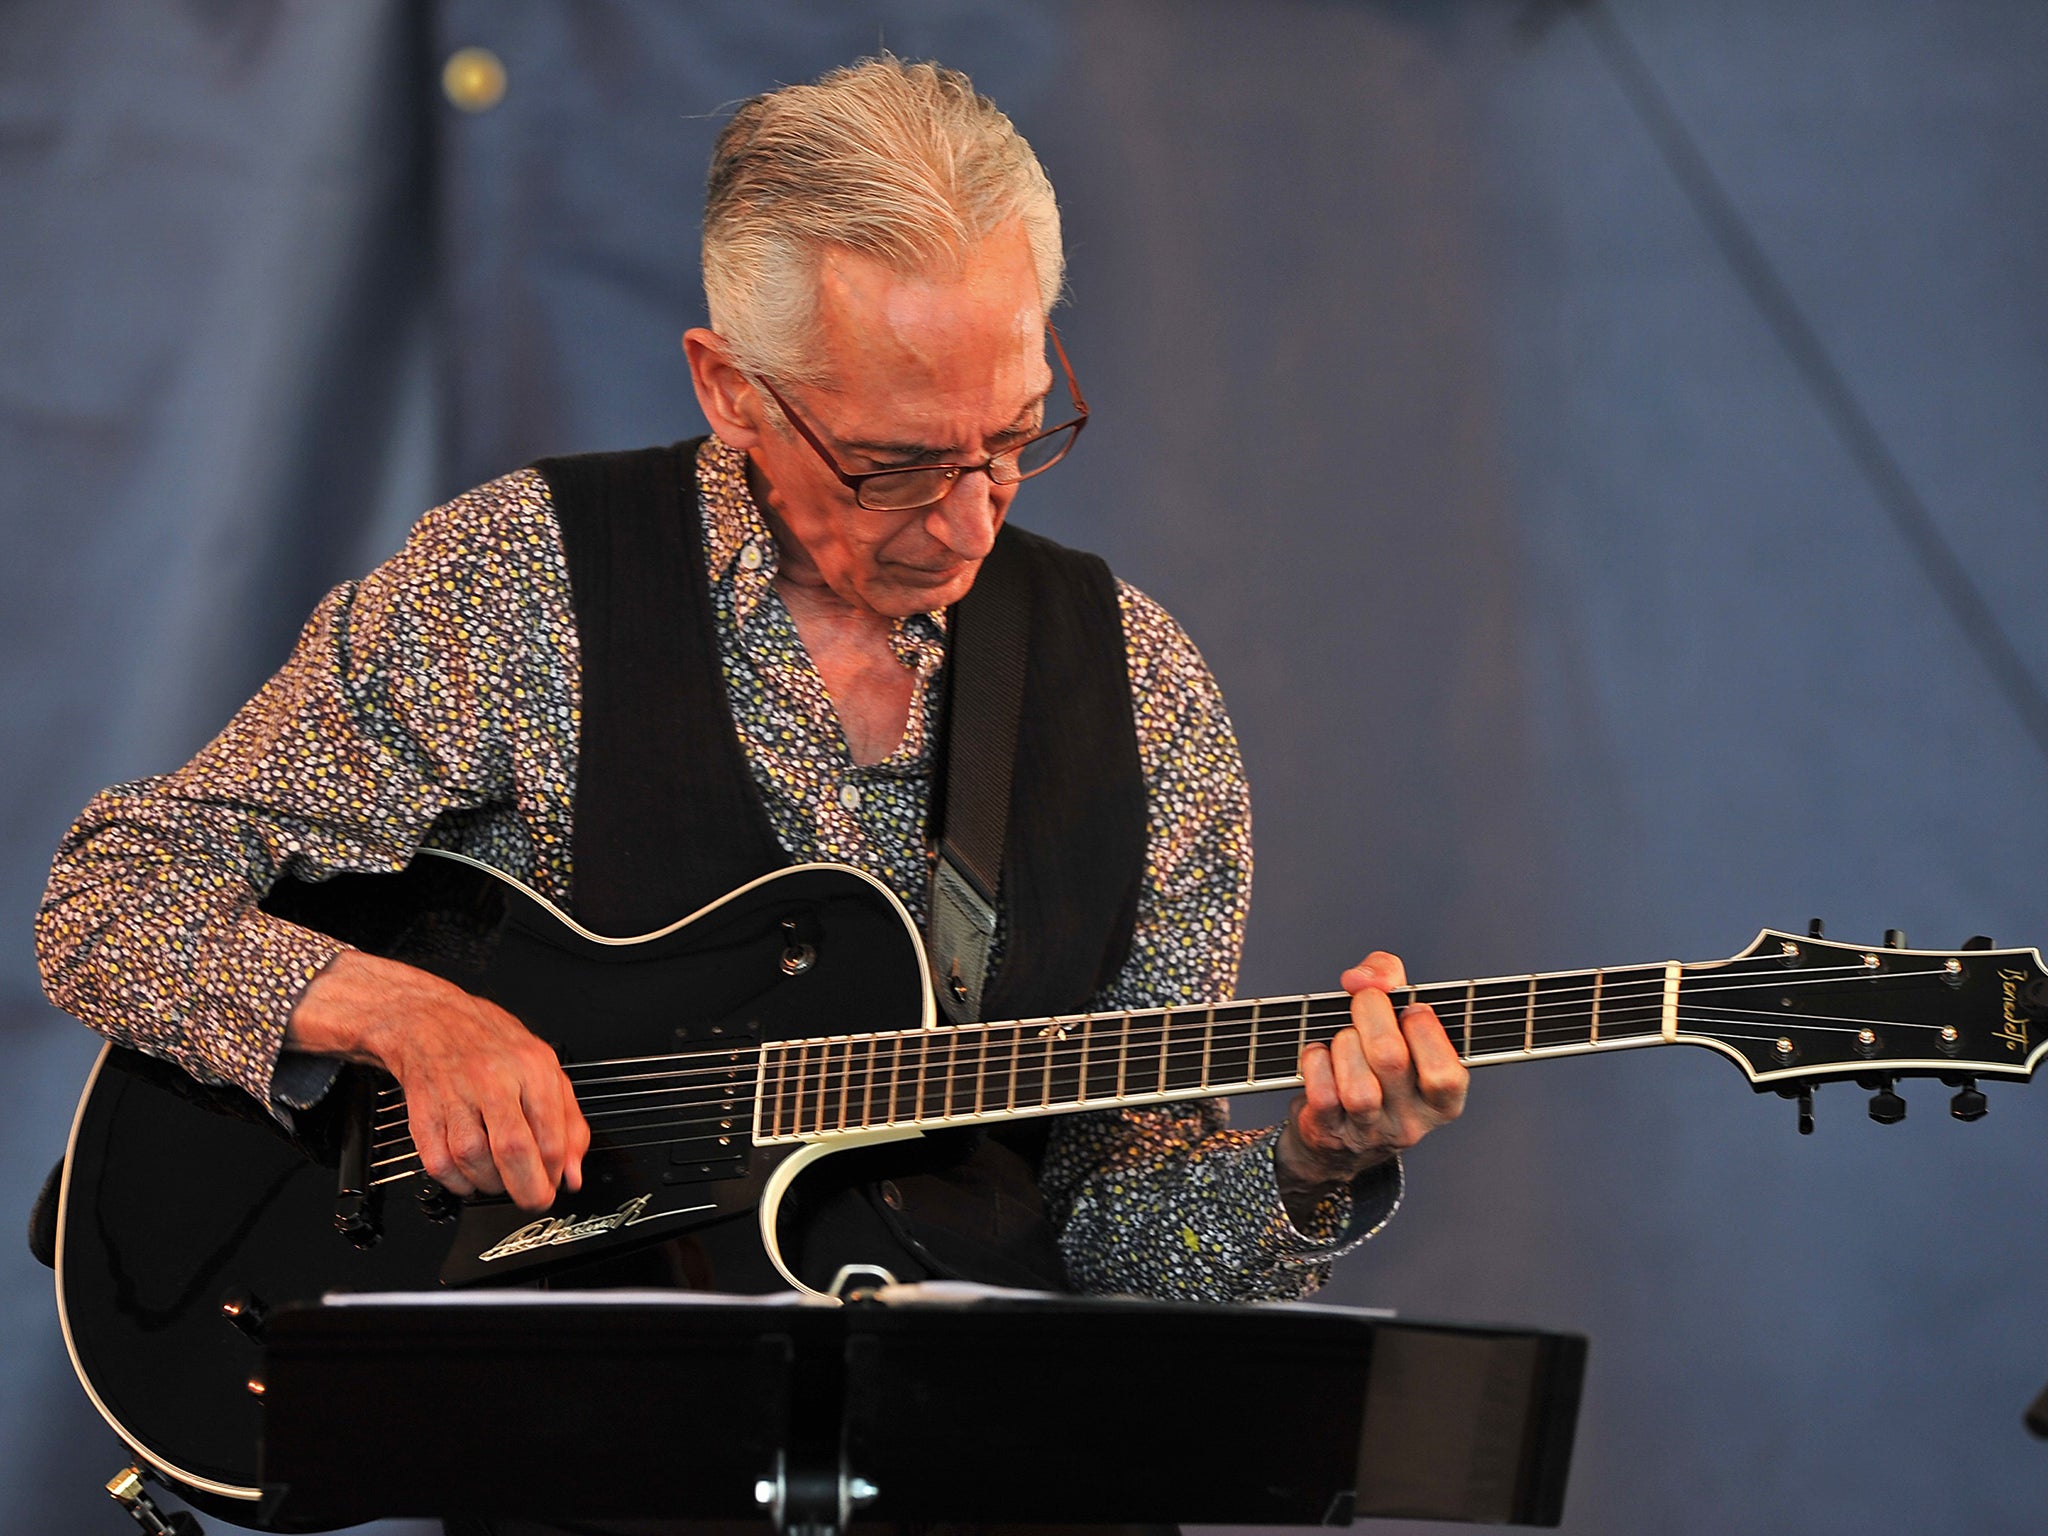 Pat Martino performing at the Newport Jazz Festival in August 2015